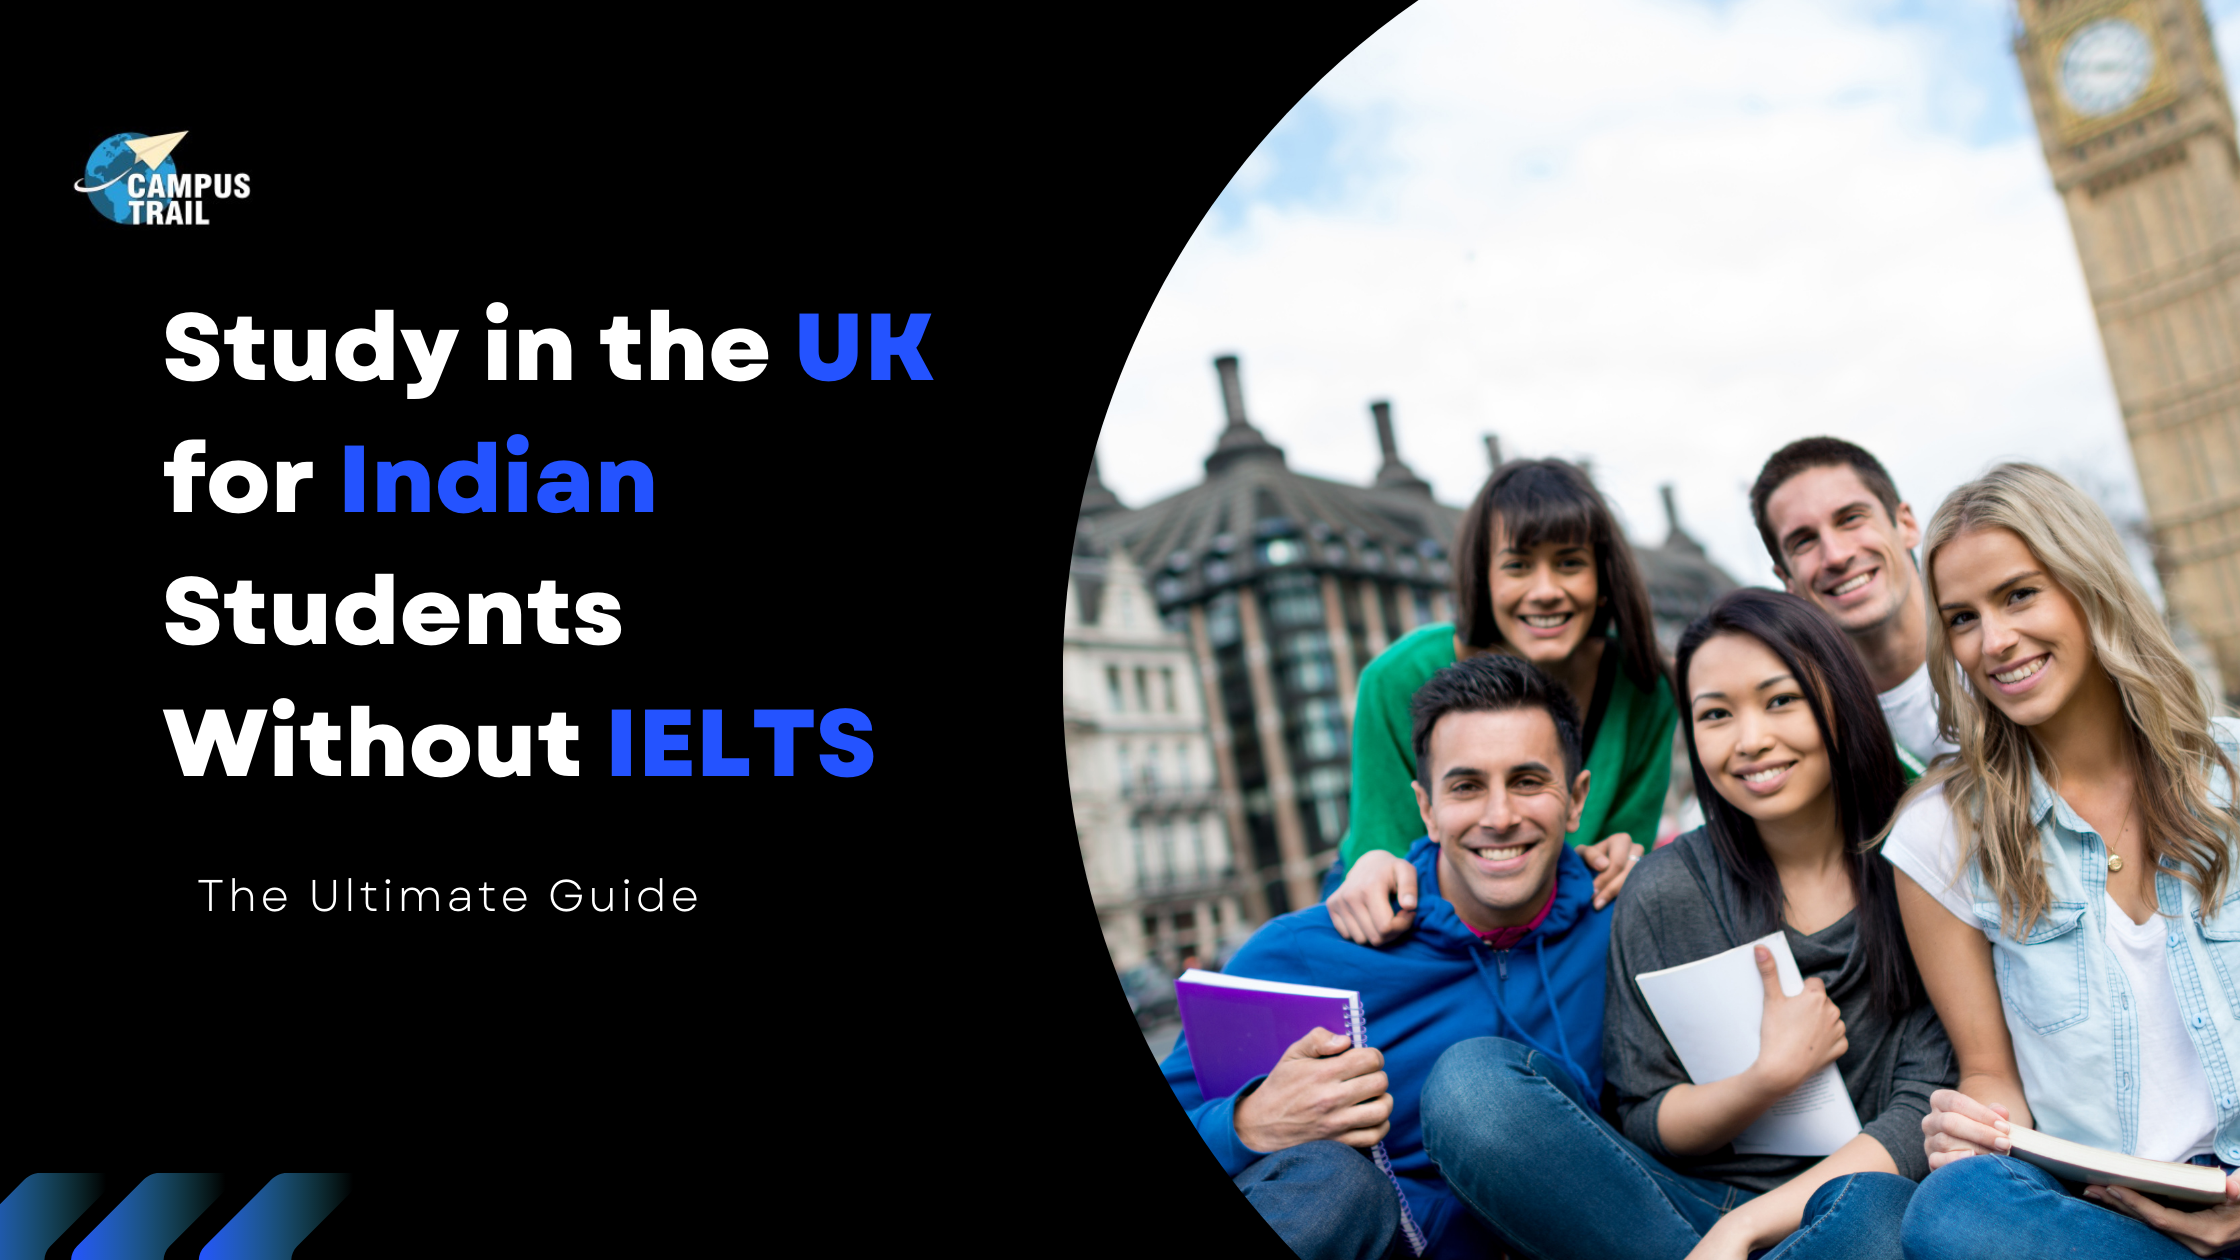 Study in the UK for Indian Students Without IELTS: The Ultimate Guide